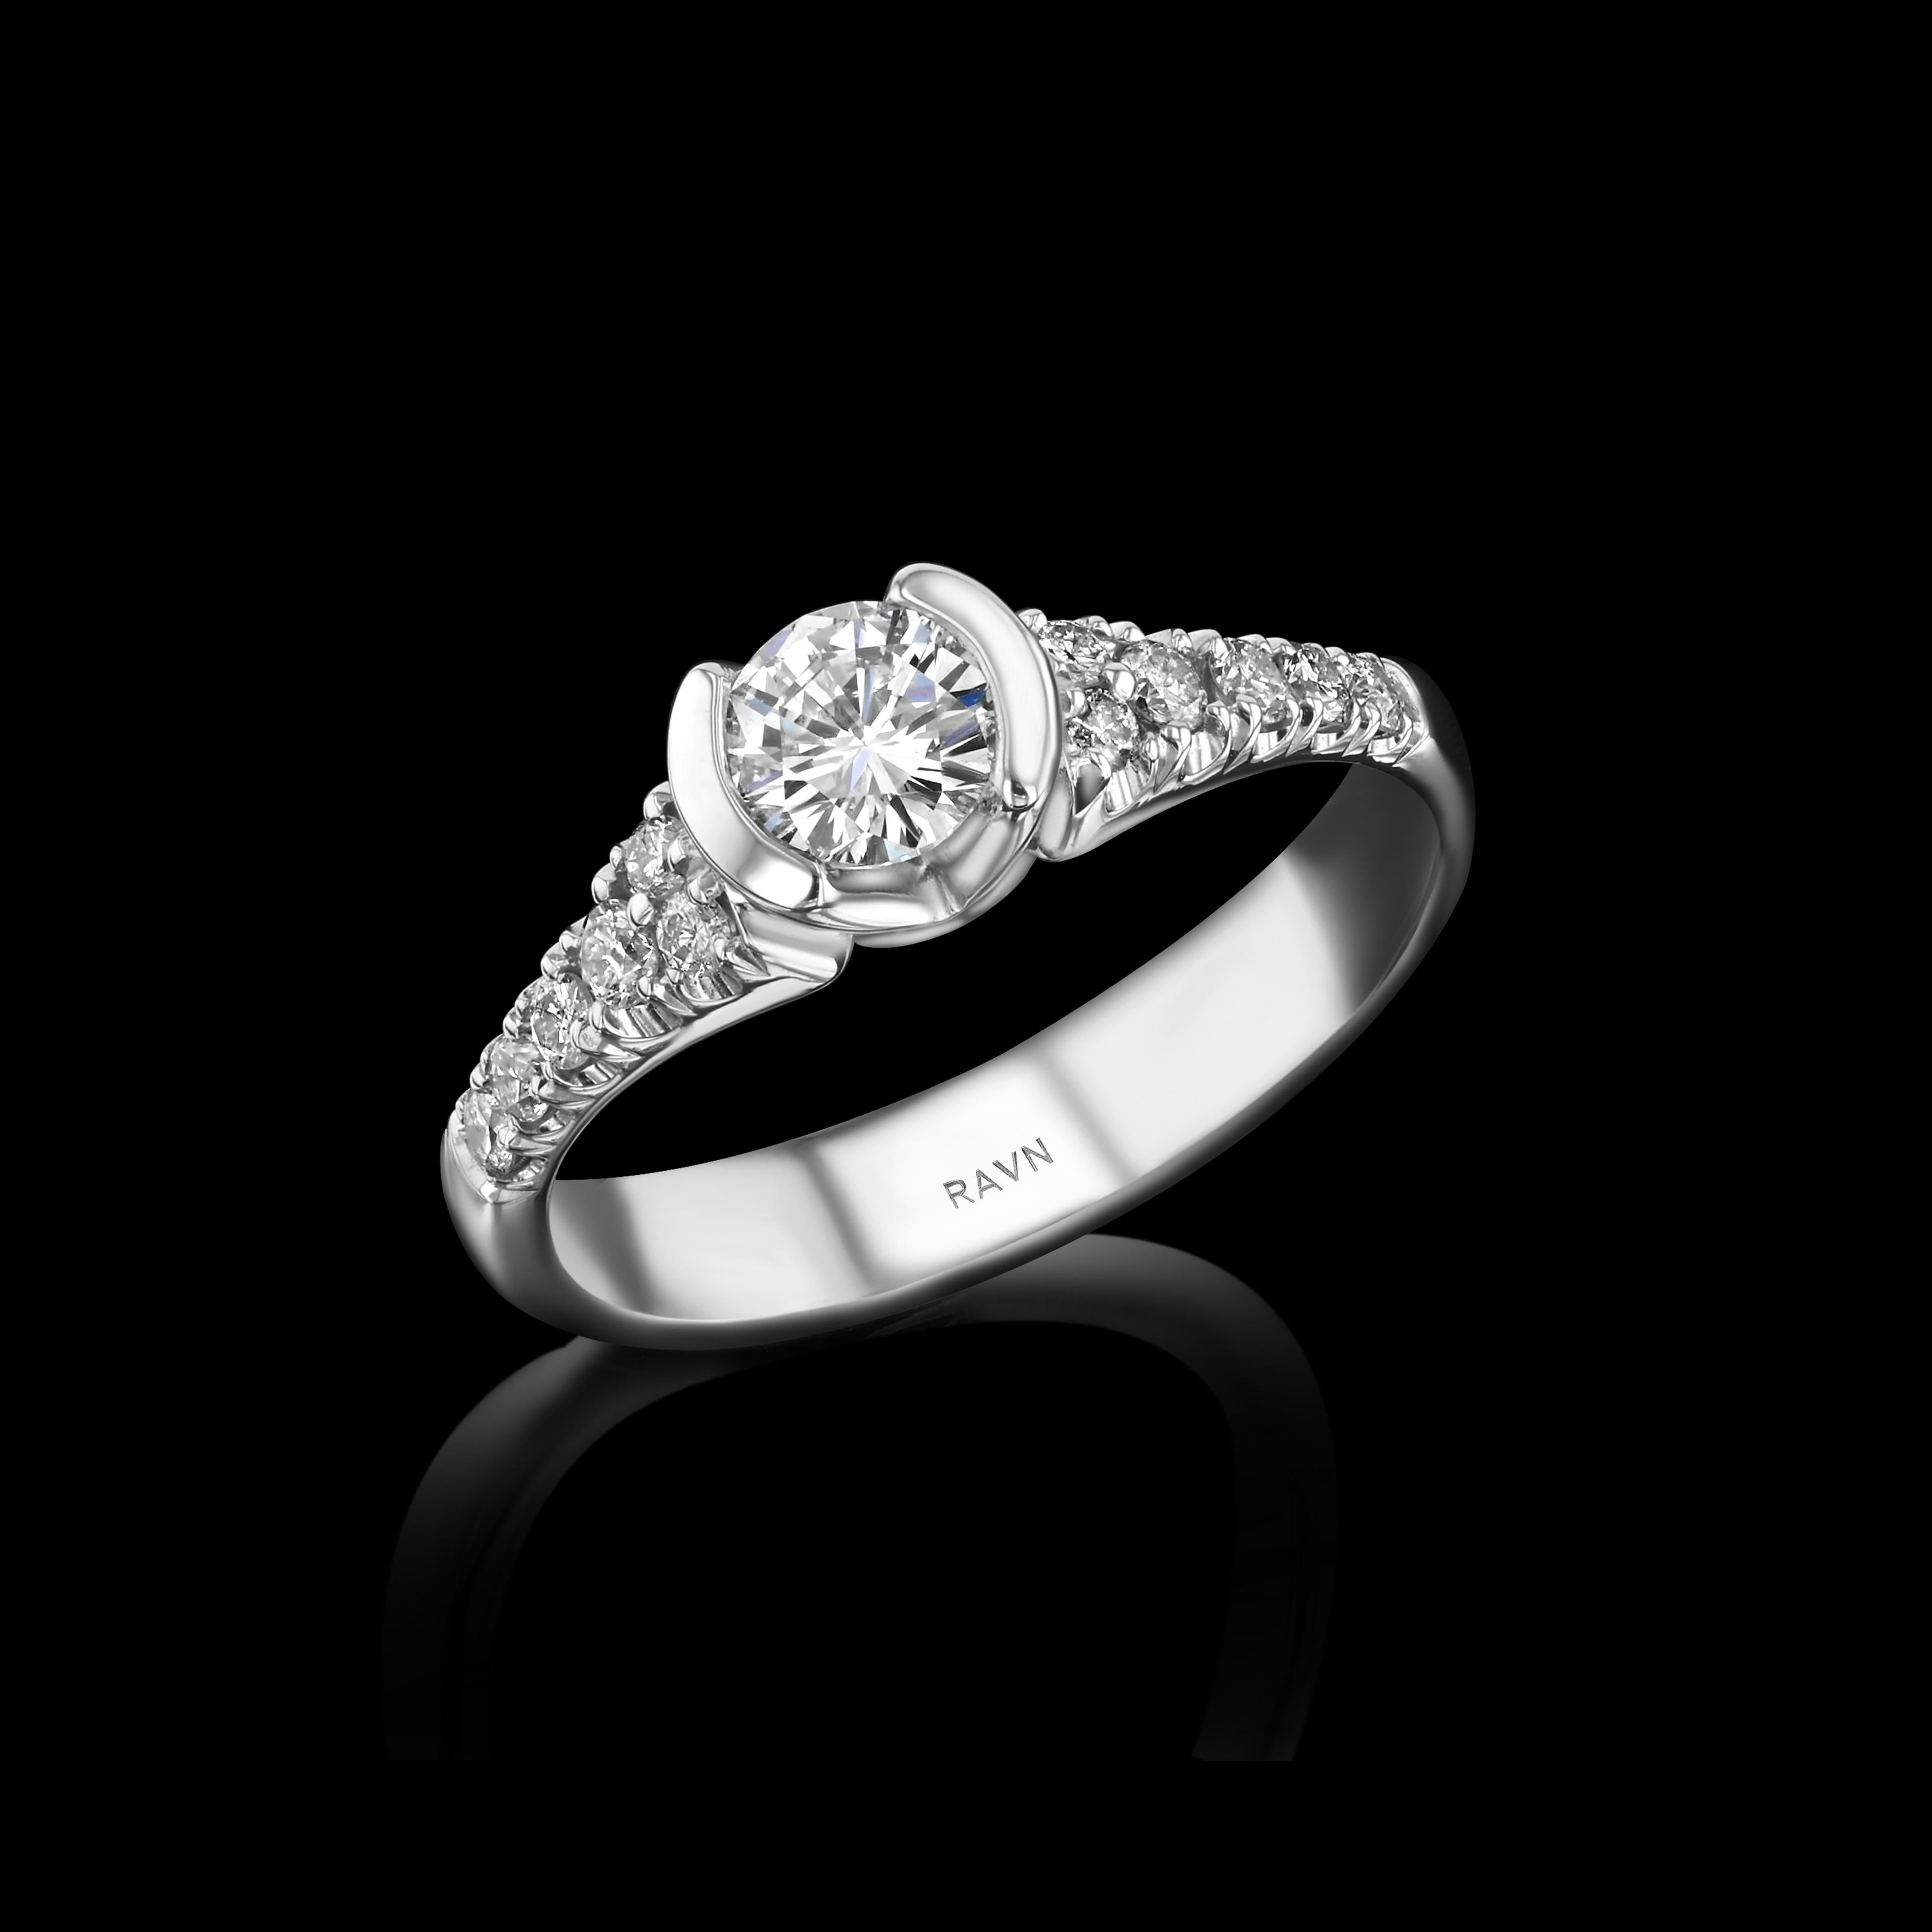 18k white gold, hand carved half bezel ring with a 0.35ct center diamond and 12 shoulder diamonds (0.12ct) from the House of RAVN Diamond Collection.   


Features .47ct total diamonds.    



The House of RAVN Diamond Collection is as an opulent